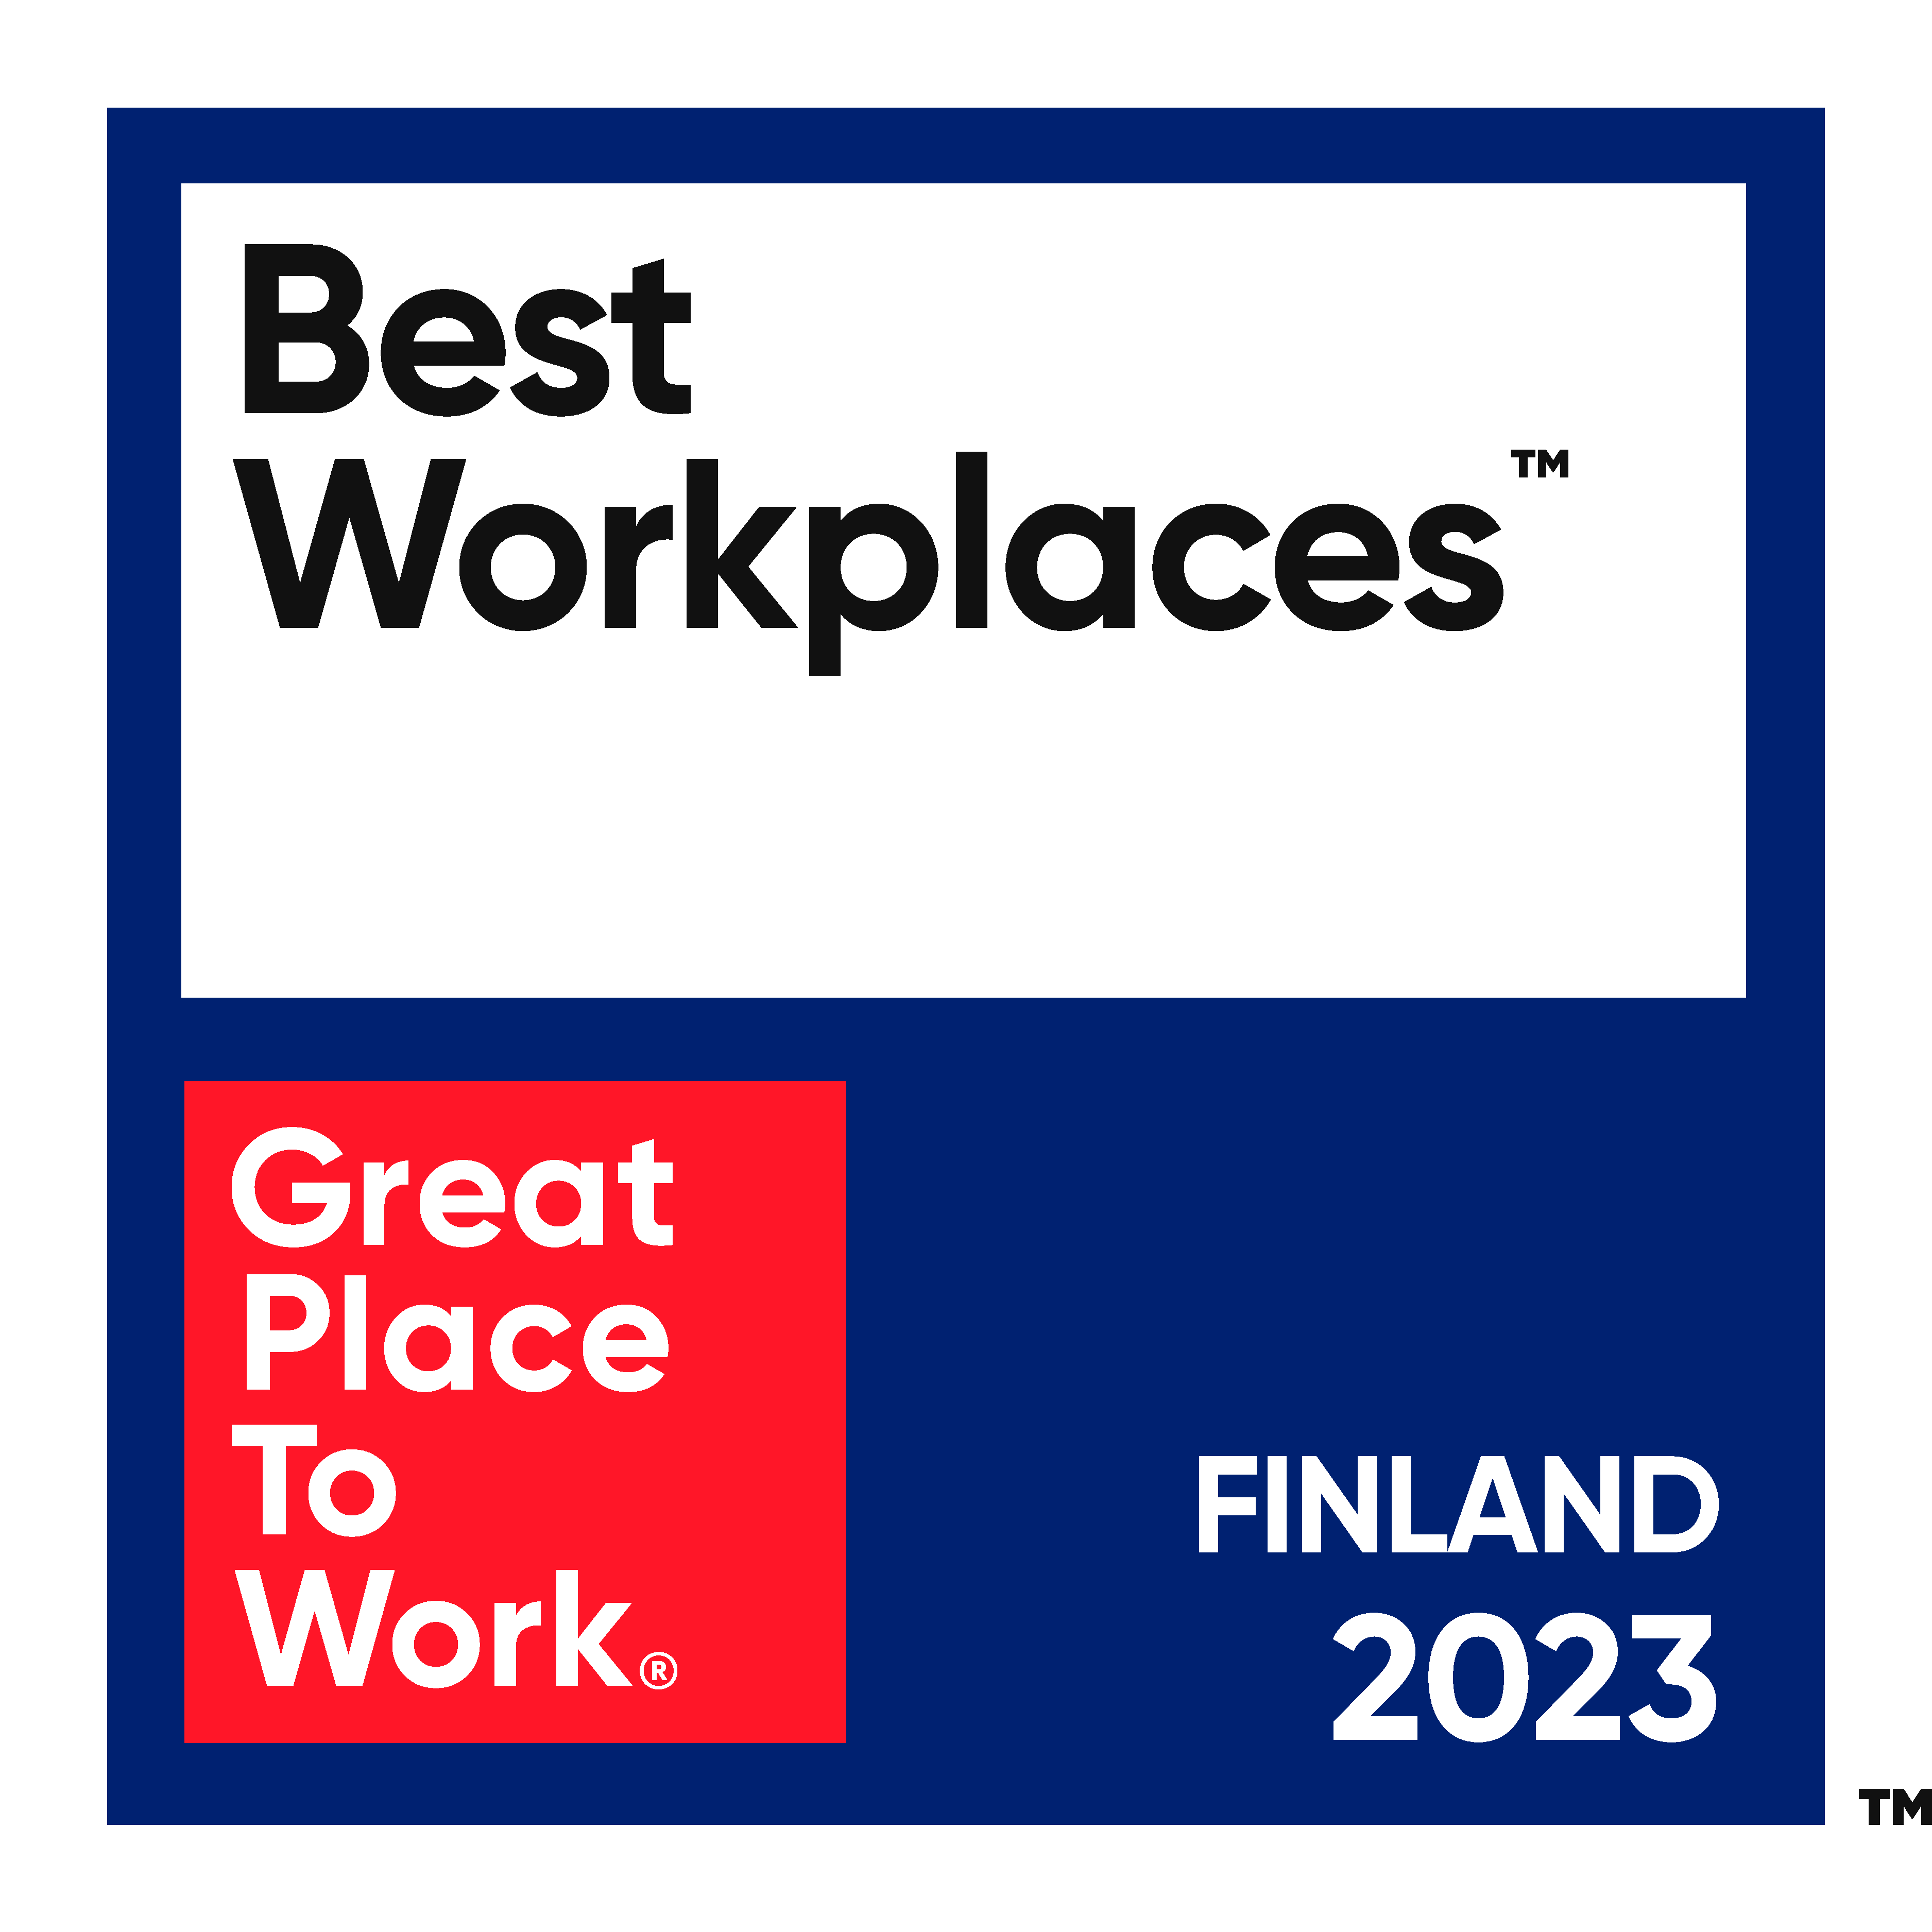 Great place to work: Best workplaces 2023